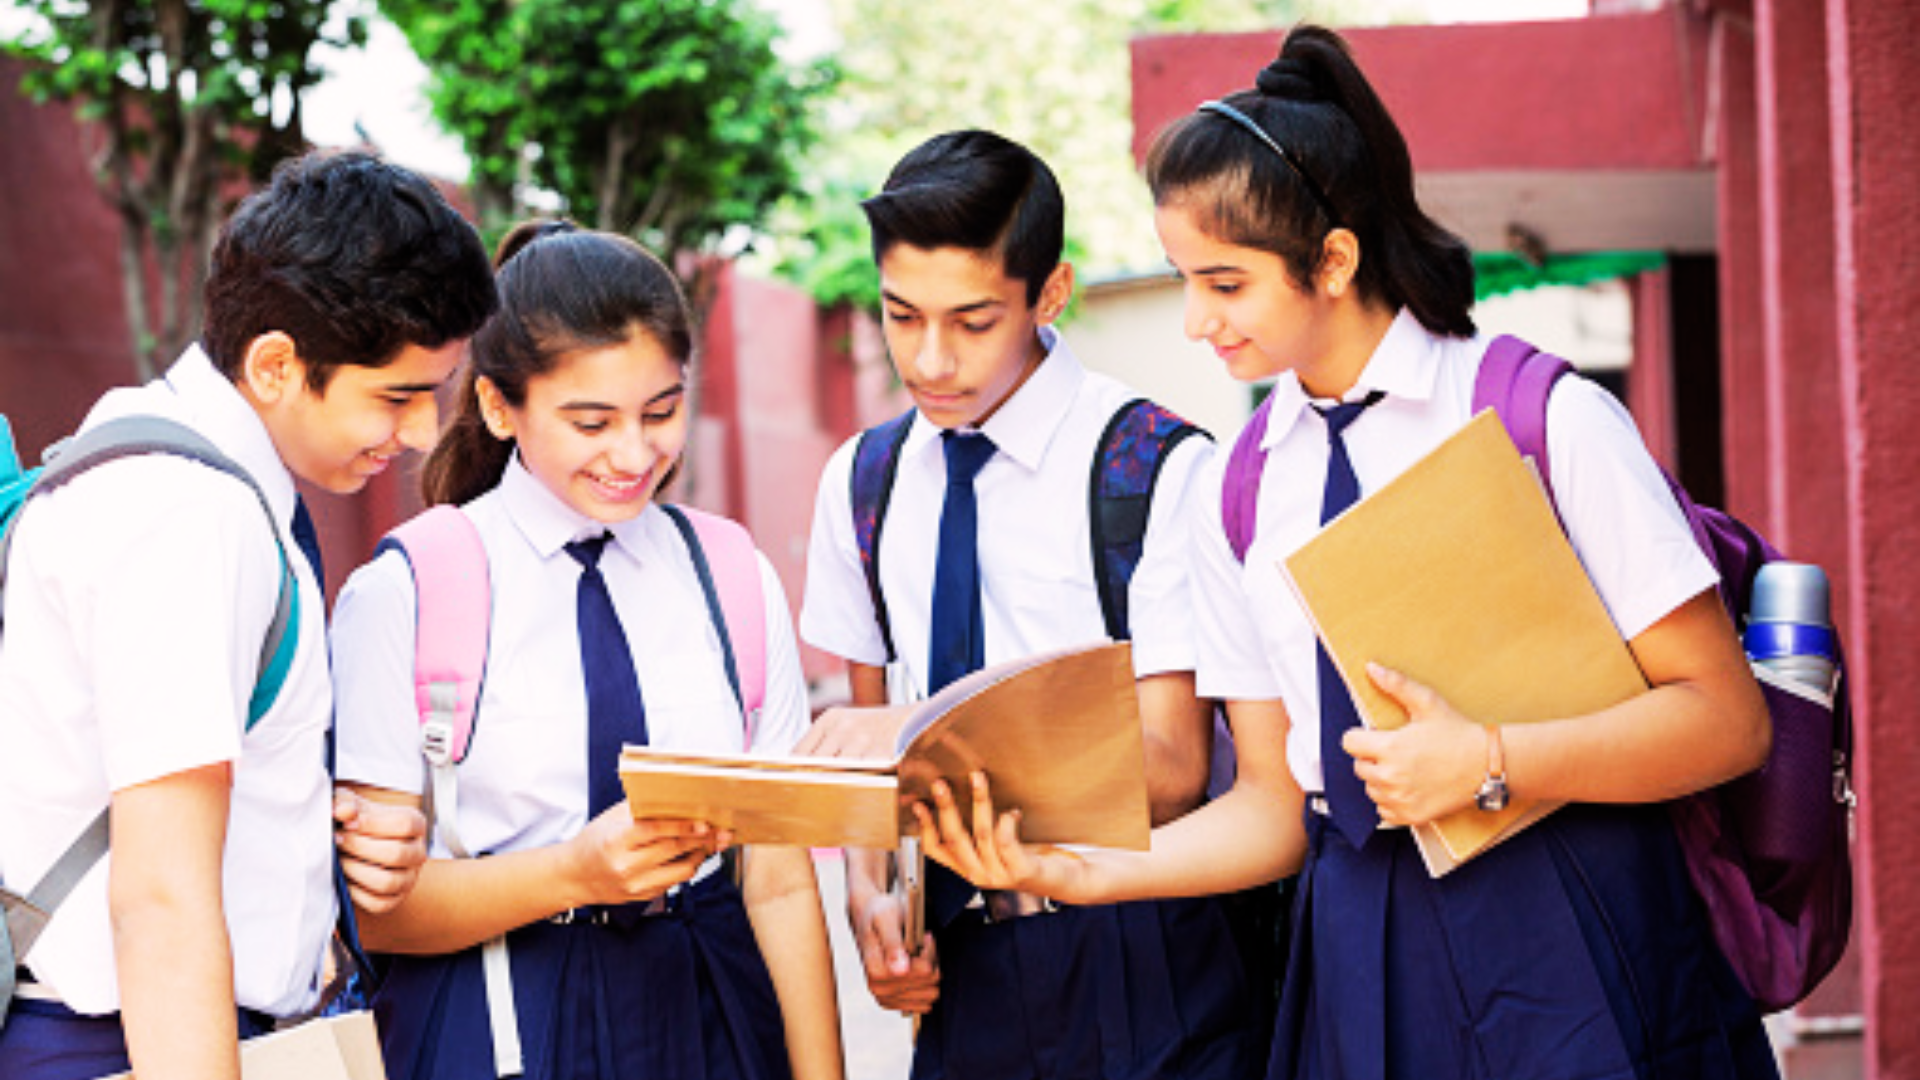 Gujarat Introduces Schemes Worth Rs 1,650 Crore for Students In Classes 9 to 12